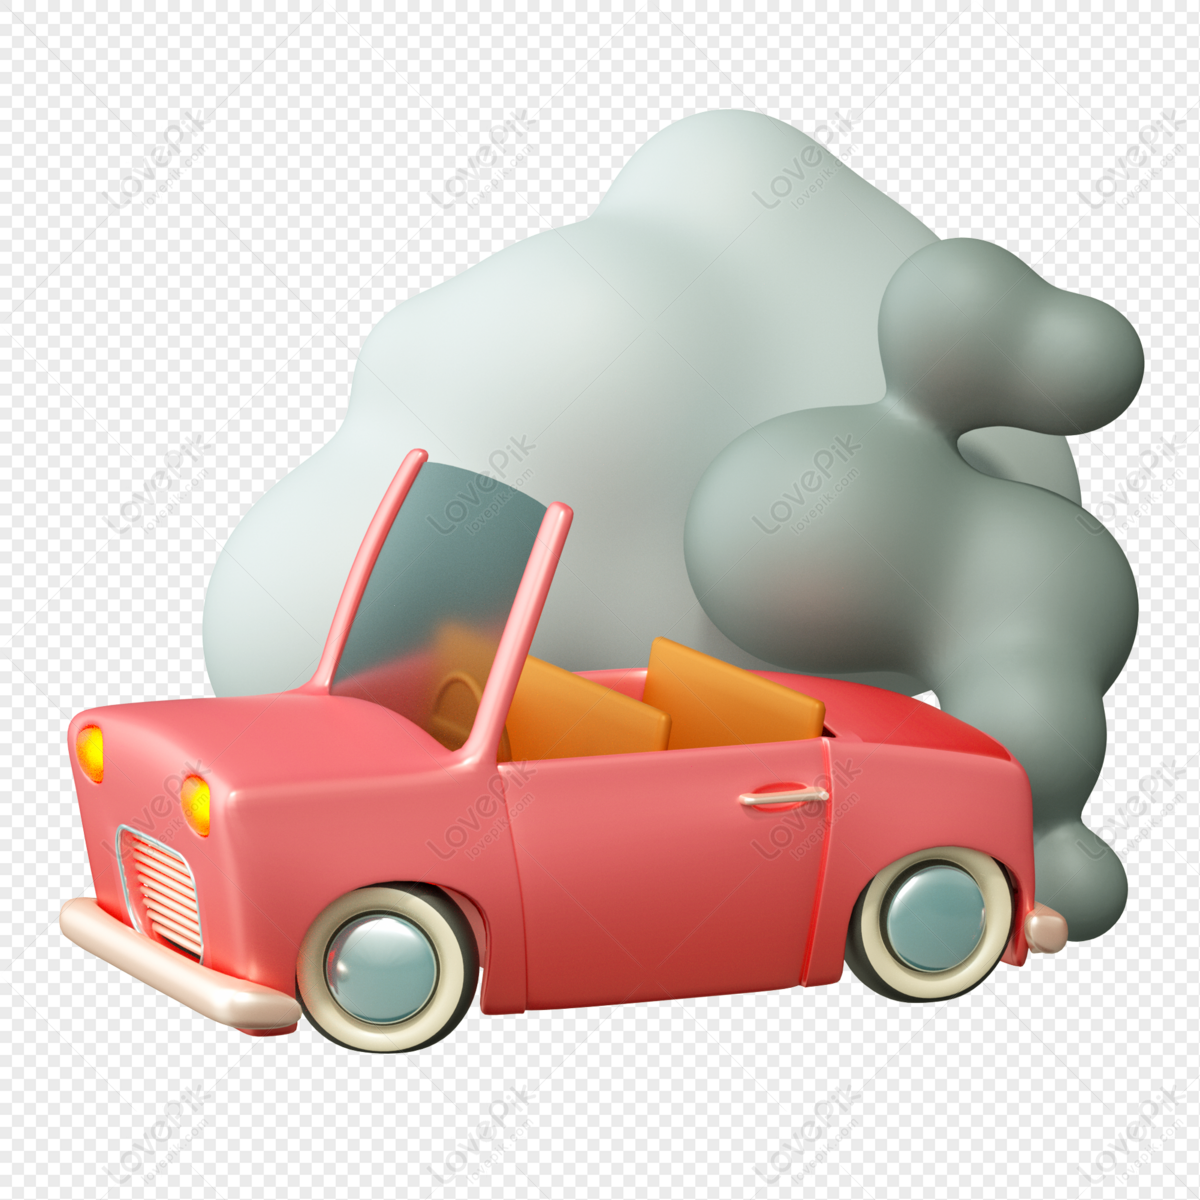 Car Exhaust Gas Pollution Environmental Emissions 3d Model Free Buckle  Element PNG Transparent Background And Clipart Image For Free Download -  Lovepik | 401950380